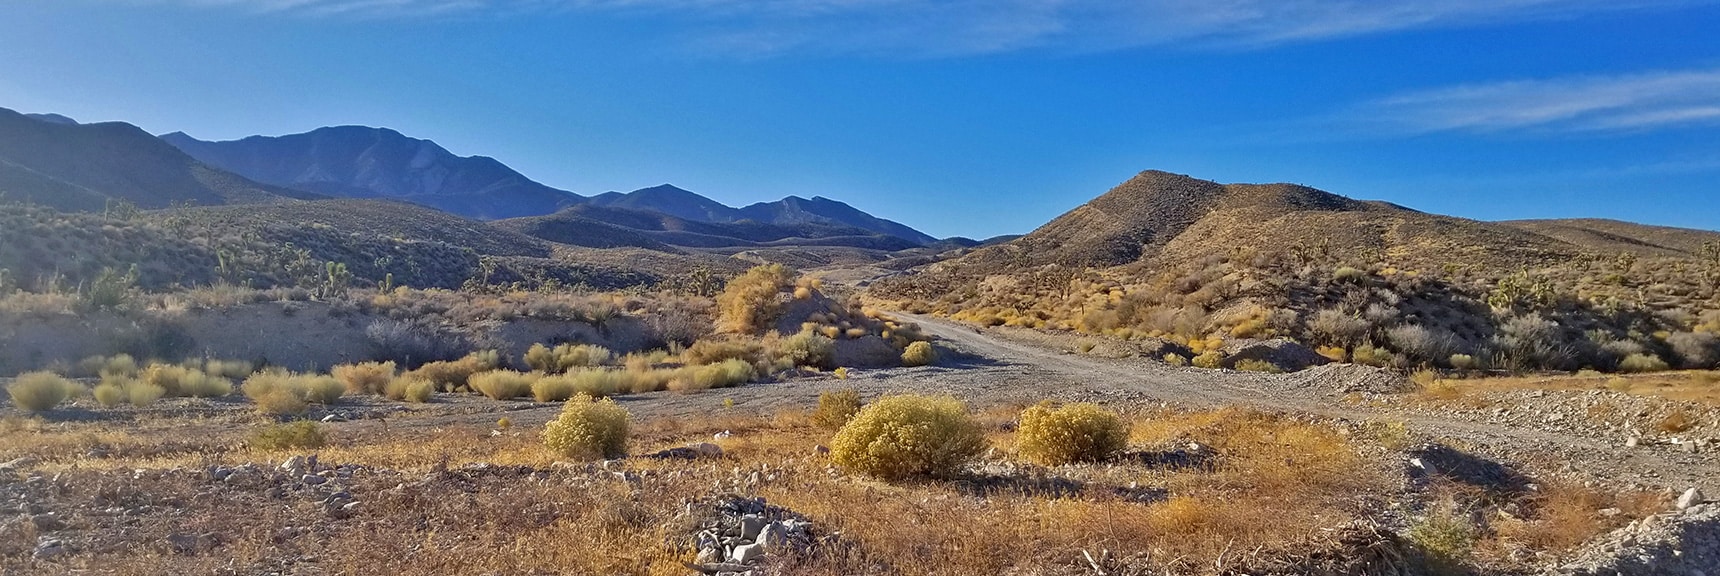 View Up Turnoff Toward Northern La Madre Mountains Wilderness Area | Harris Springs Rd, Harris Mountain Rd | Spring Mountains Wilderness, Nevada